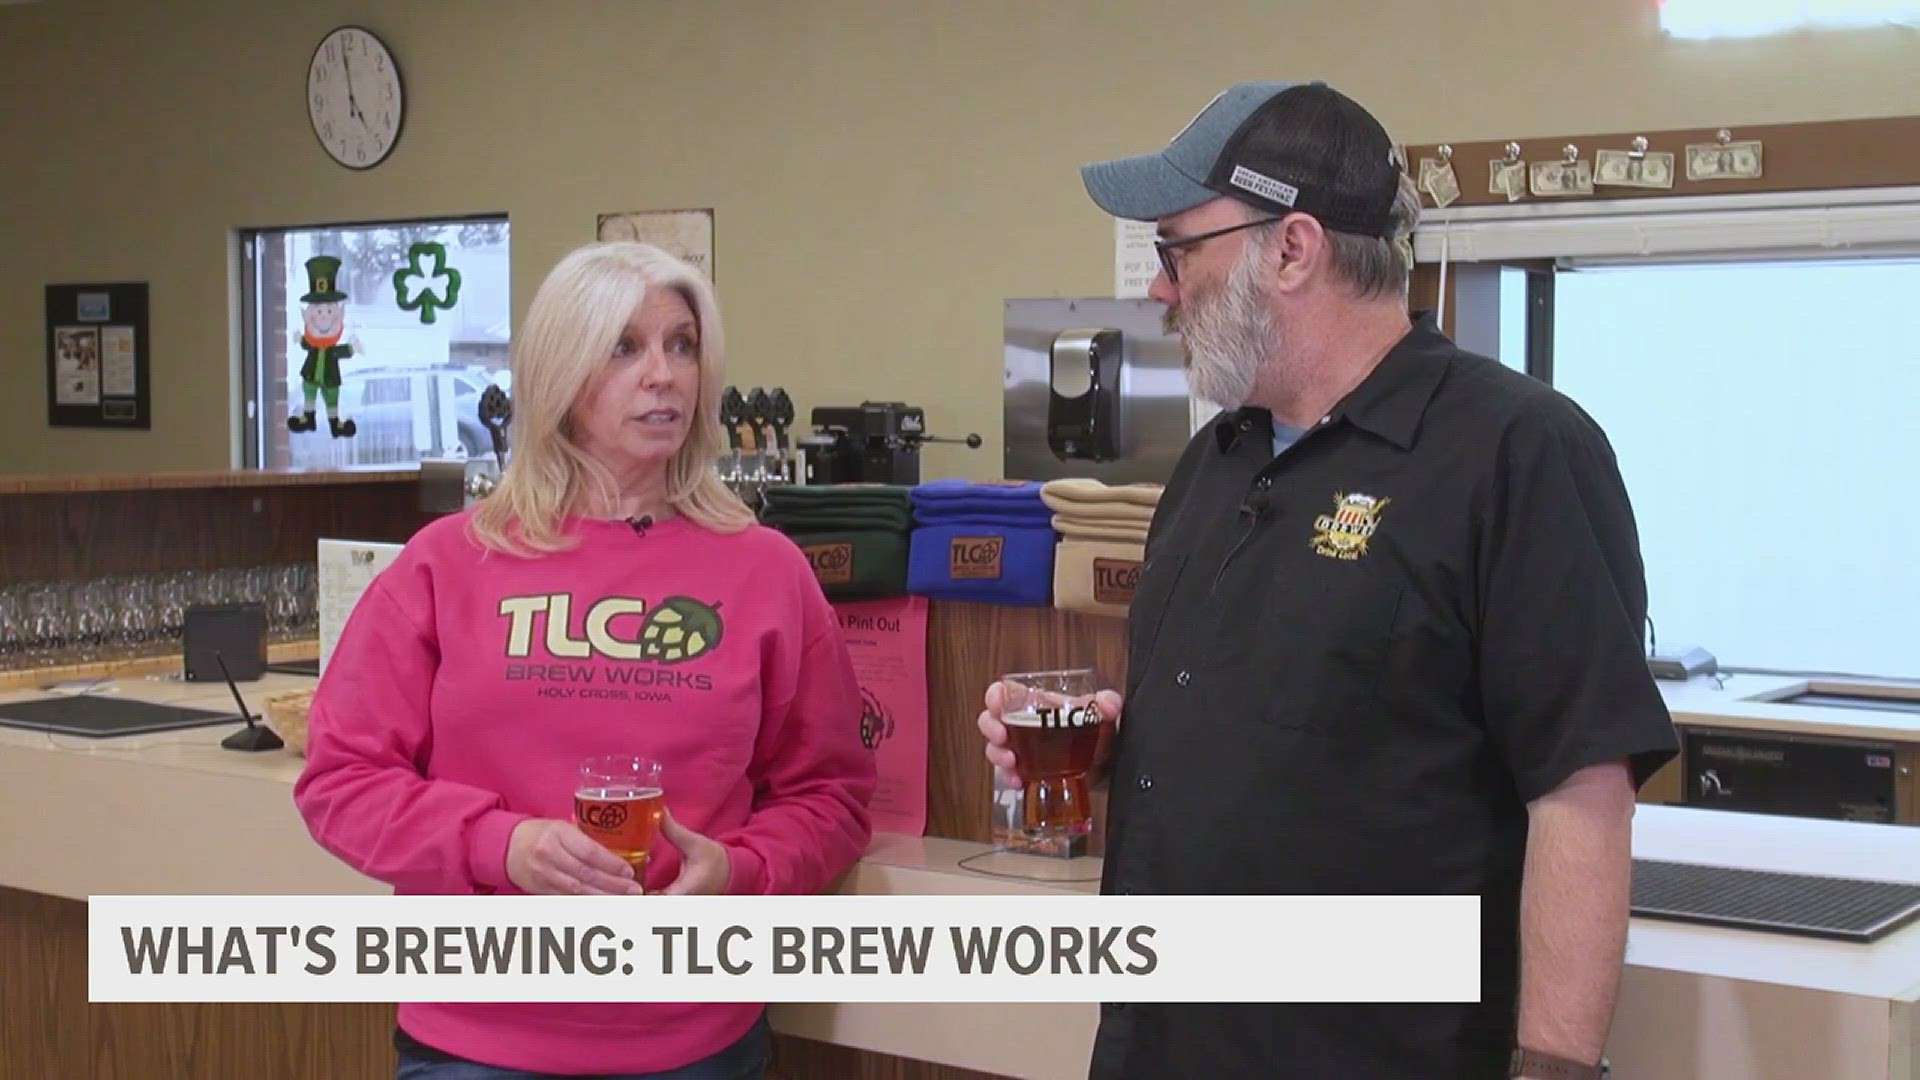 TLC Brew Works and Eldridge's The Granary came together to produce a coffee stout beer that's coming to taps at both locations.